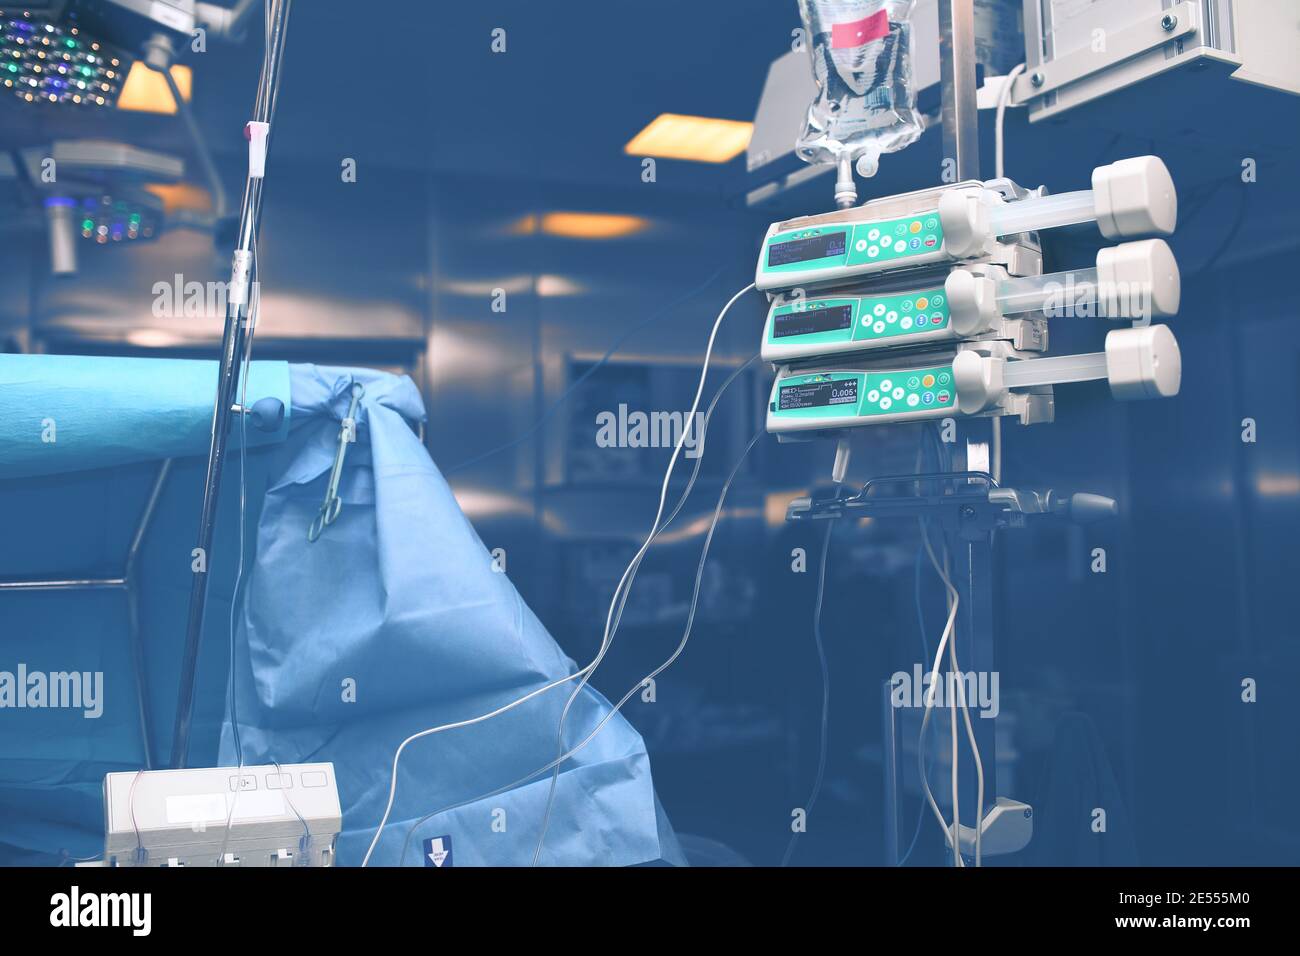 Equipment in the hospital operating room. Stock Photo